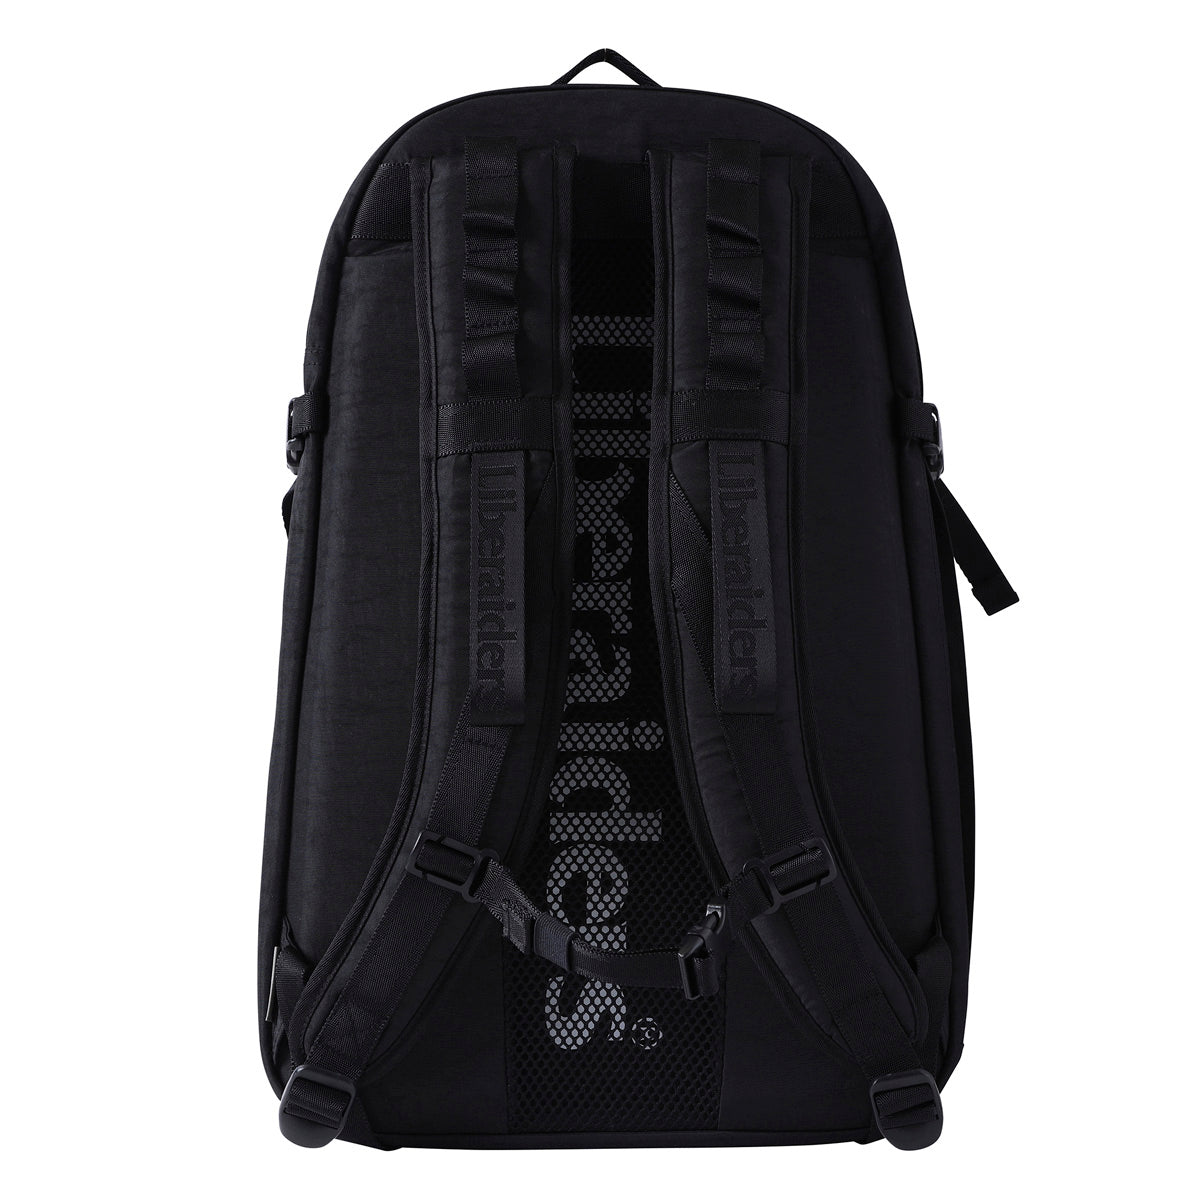 TRAVERSE BACKPACK 